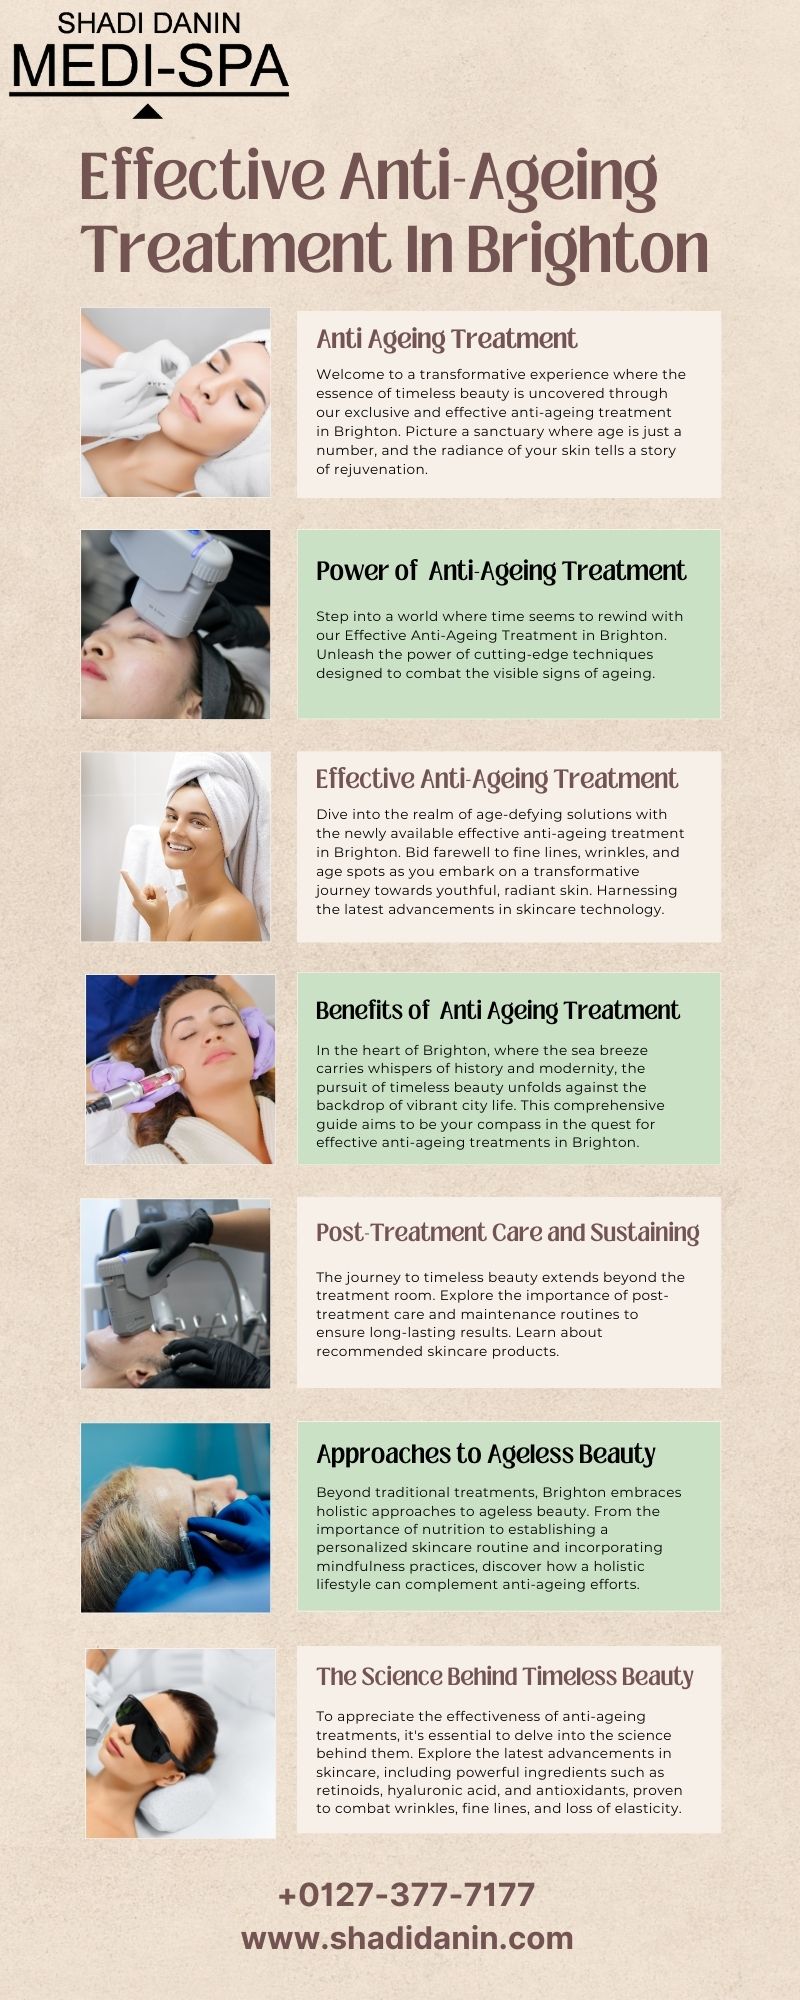 Effective Anti-Ageing Treatment (1) by shadidanin on DeviantArt